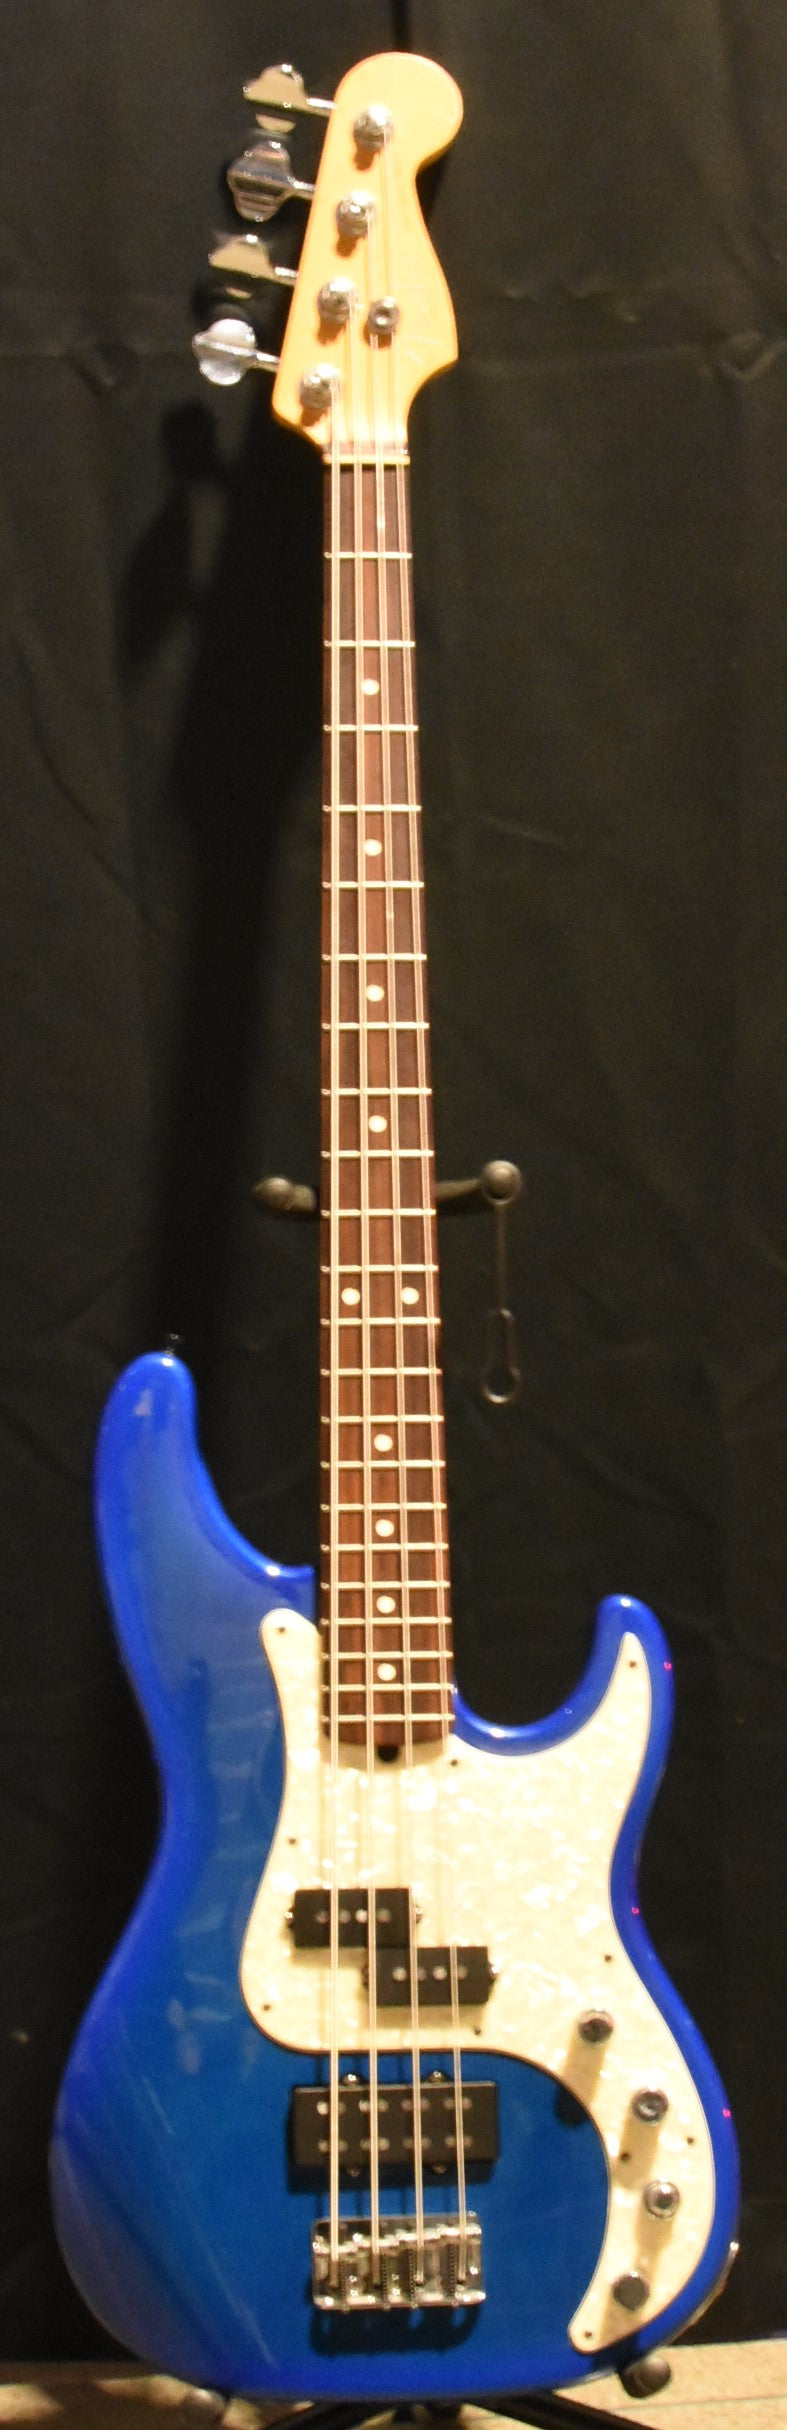 Used Fender USA Deluxe PJ P Bass - Trans Teal Green